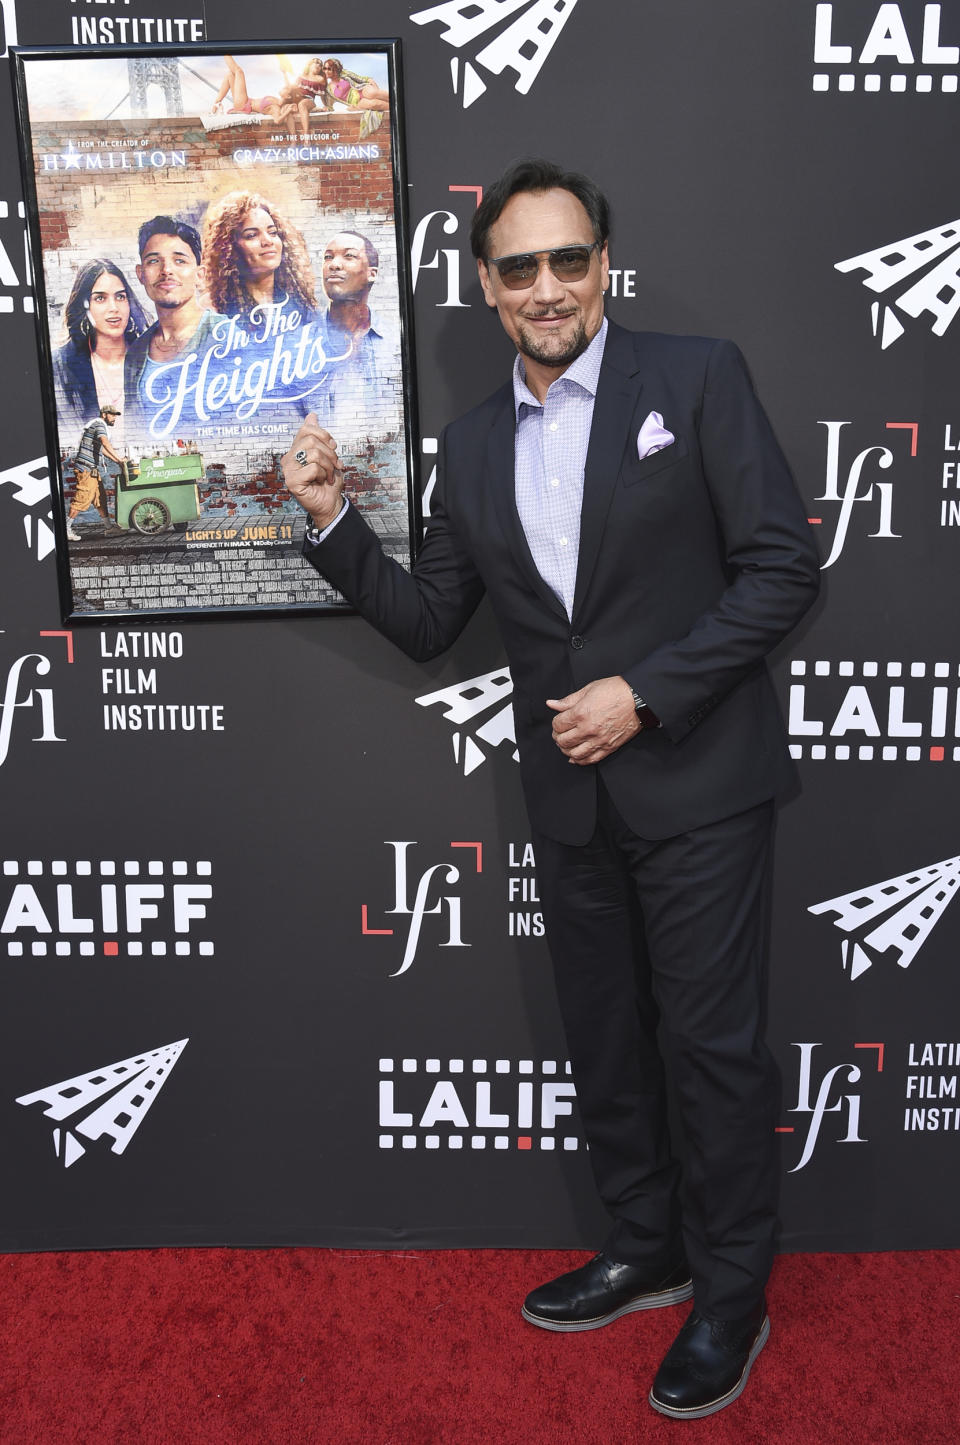 Jimmy Smits arrives at a screening of "In the Heights" during the Los Angeles Latino International Film Festival at TCL Chinese Theatre on Friday, June 4, 2021, in Los Angeles. (Photo by Richard Shotwell/Invision/AP)